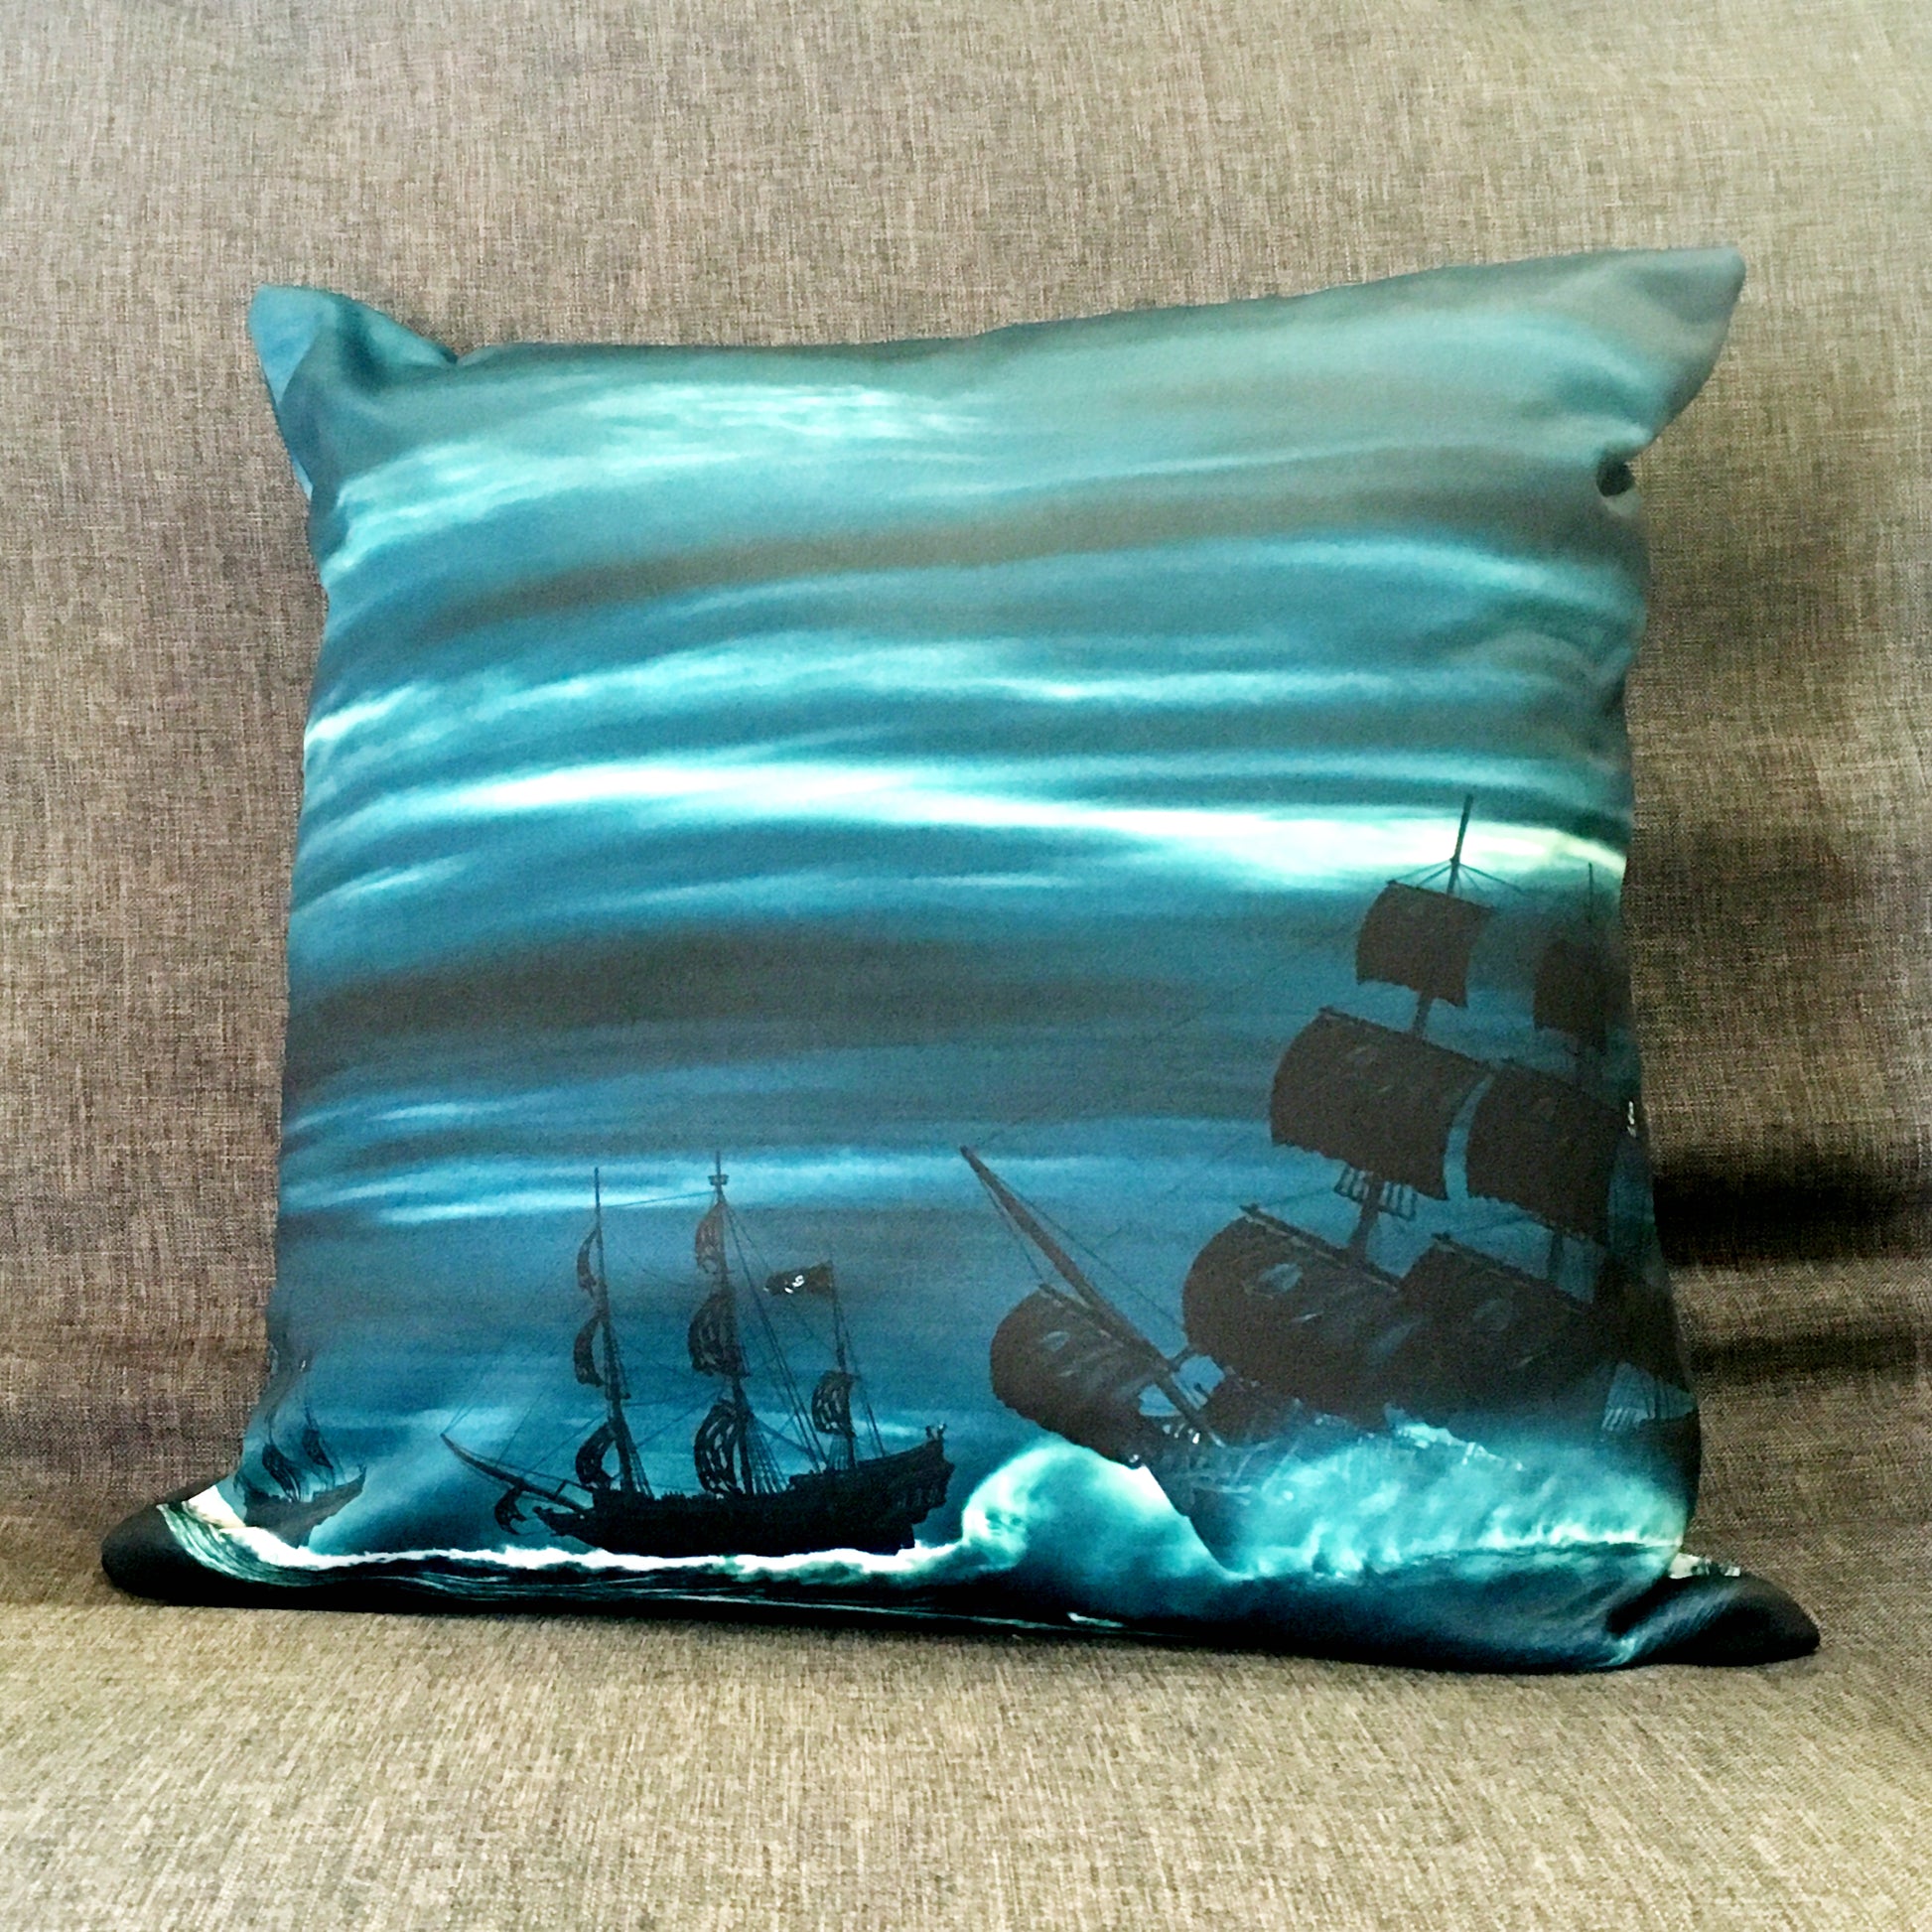 Blue, white, and black pirate ships on a square throw pillow